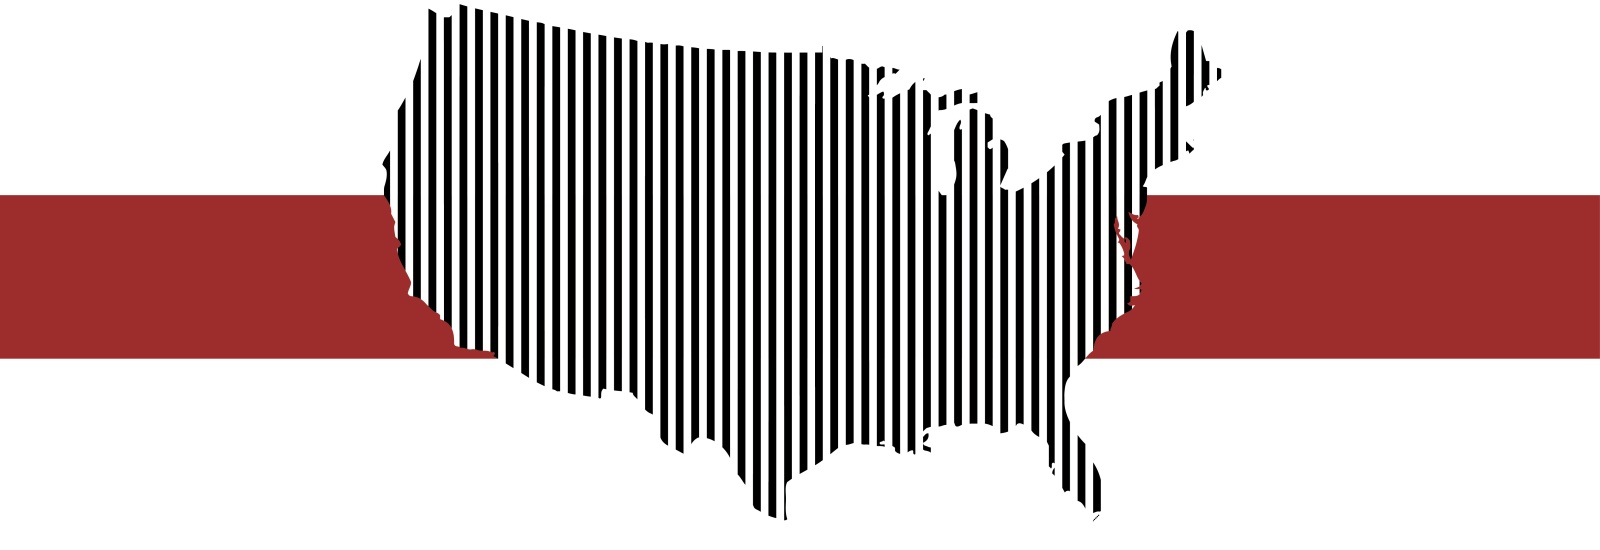 Illustration of the United Stated composed of vertical black lines with a horizontal red line behind